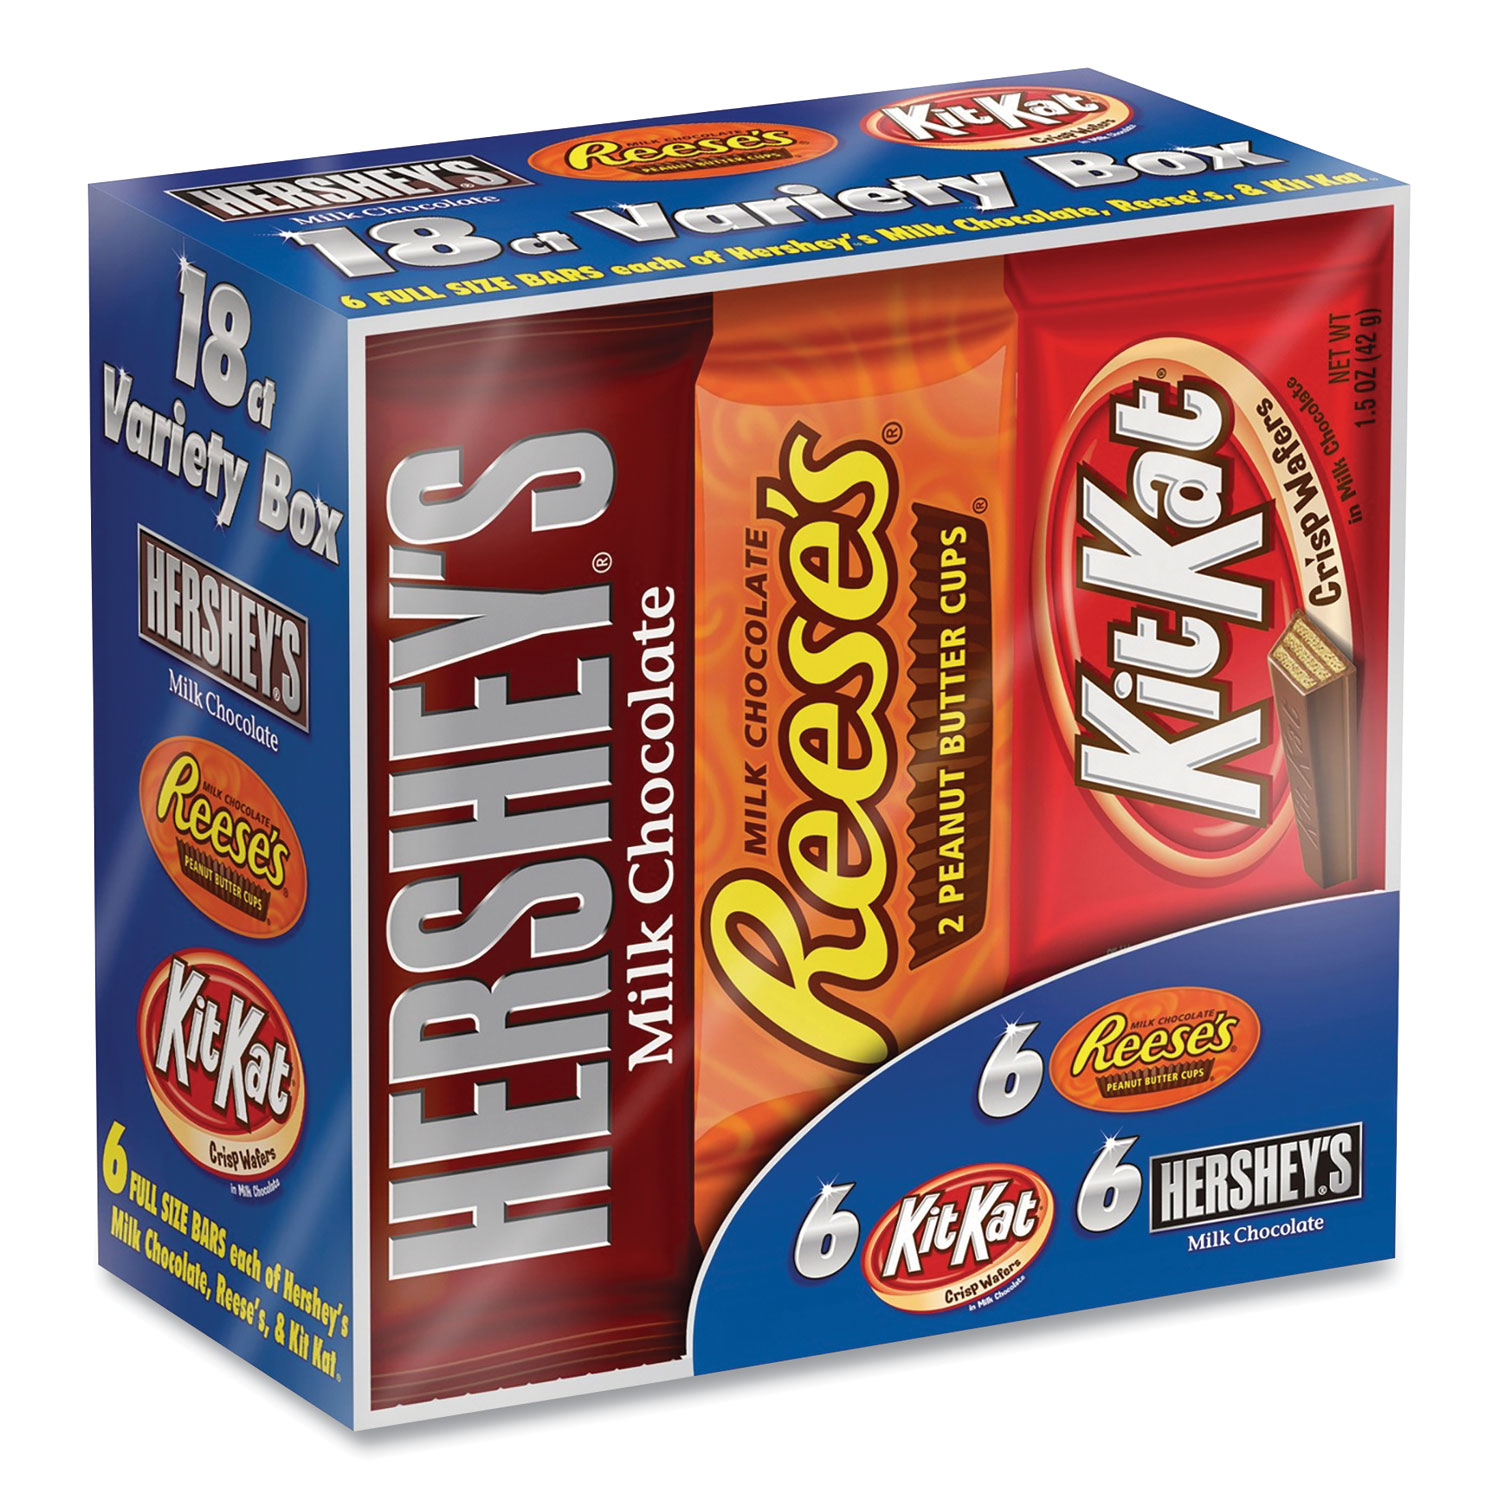  Hershey's 40597 Full Size Chocolate Candy Bar Variety Pack, Assorted 1.5 oz Bar, 18 Bars/Box, Free Delivery in 1-4 Business Days (GRR24600349) 